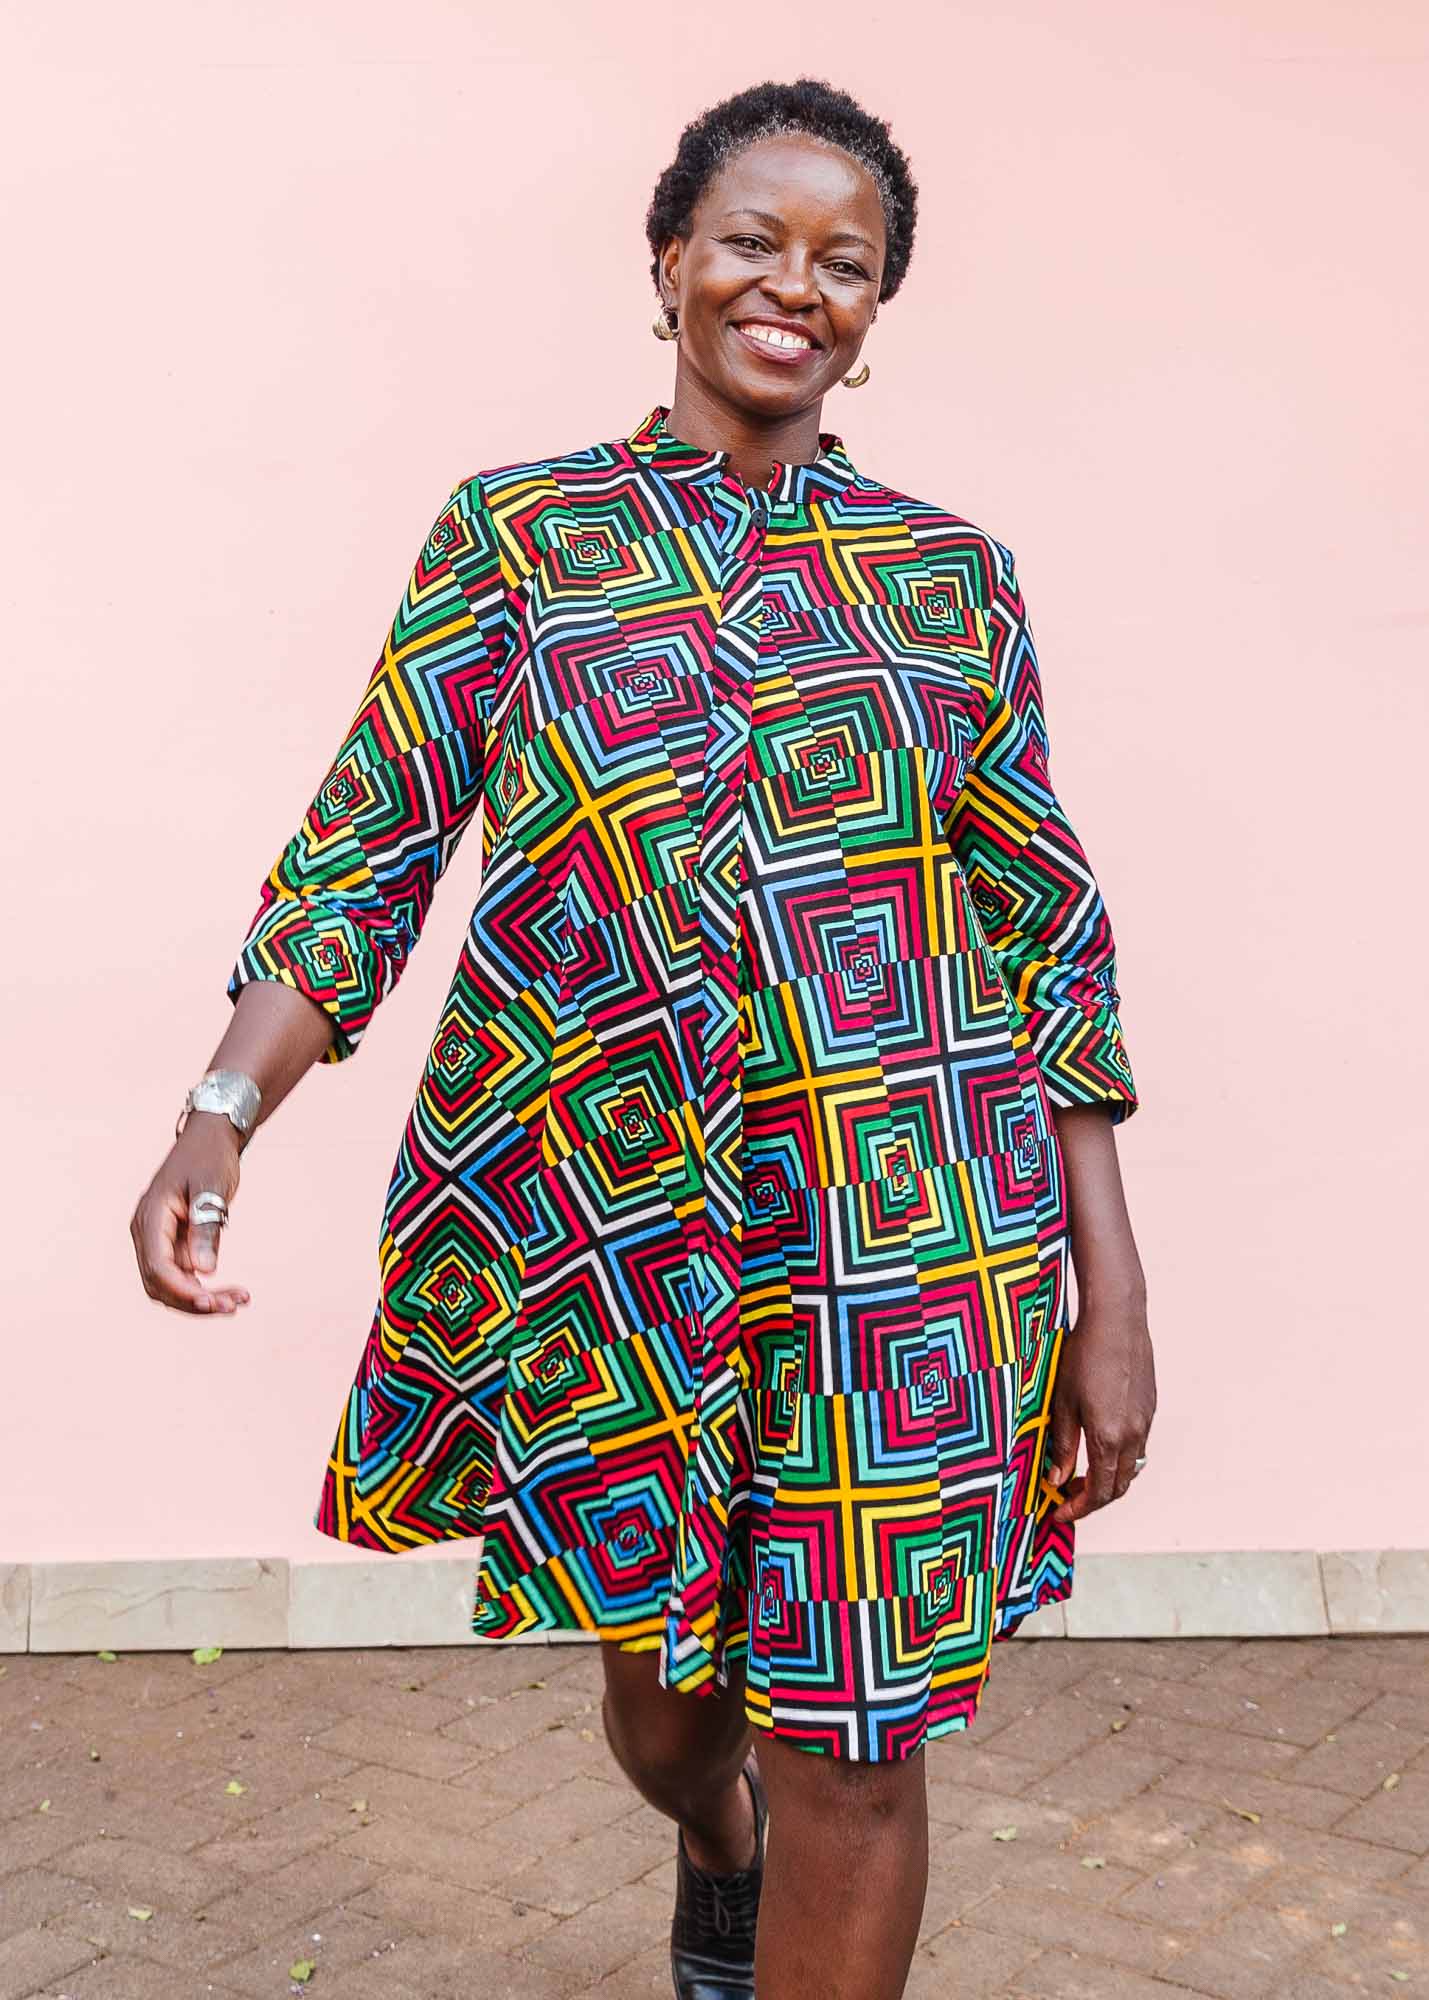 The model is wearing geometric print with rainbow colored dress 